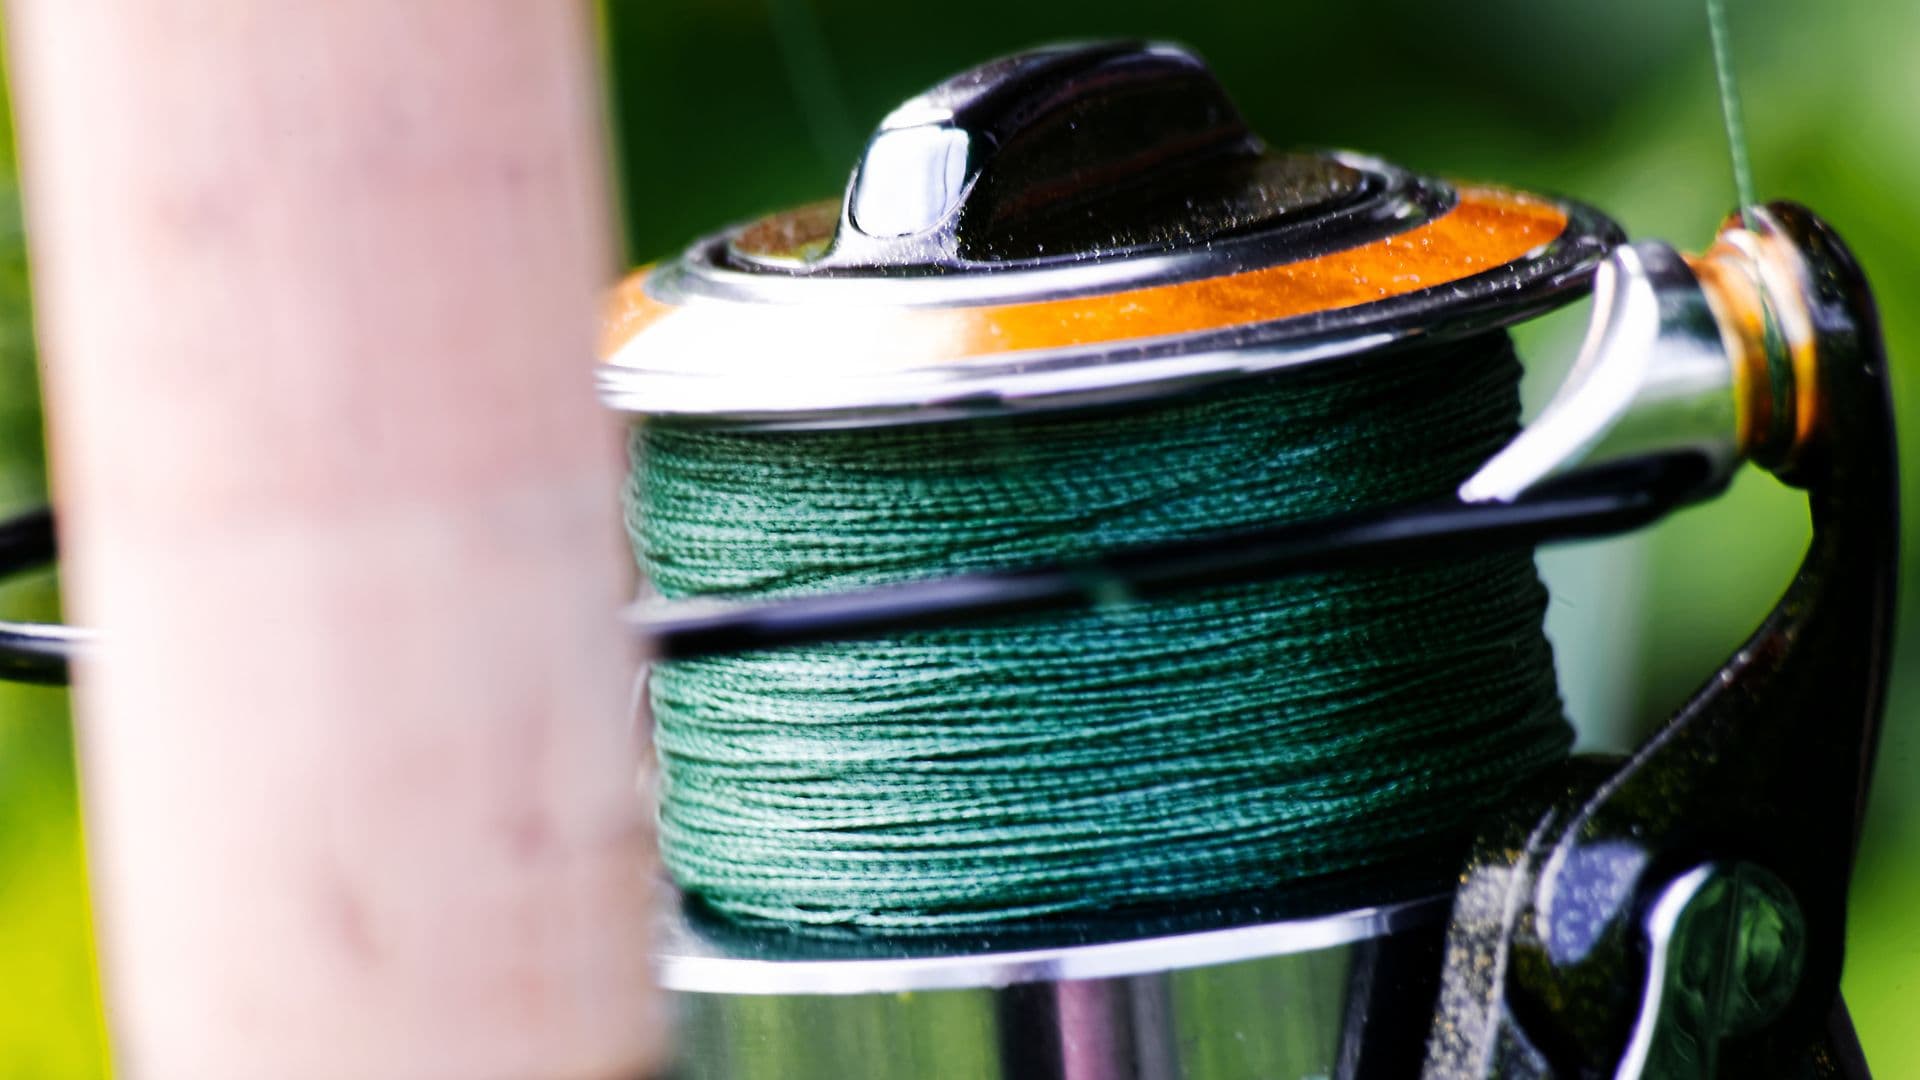 Best Braided Fishing Line, Unveiling the Top Picks